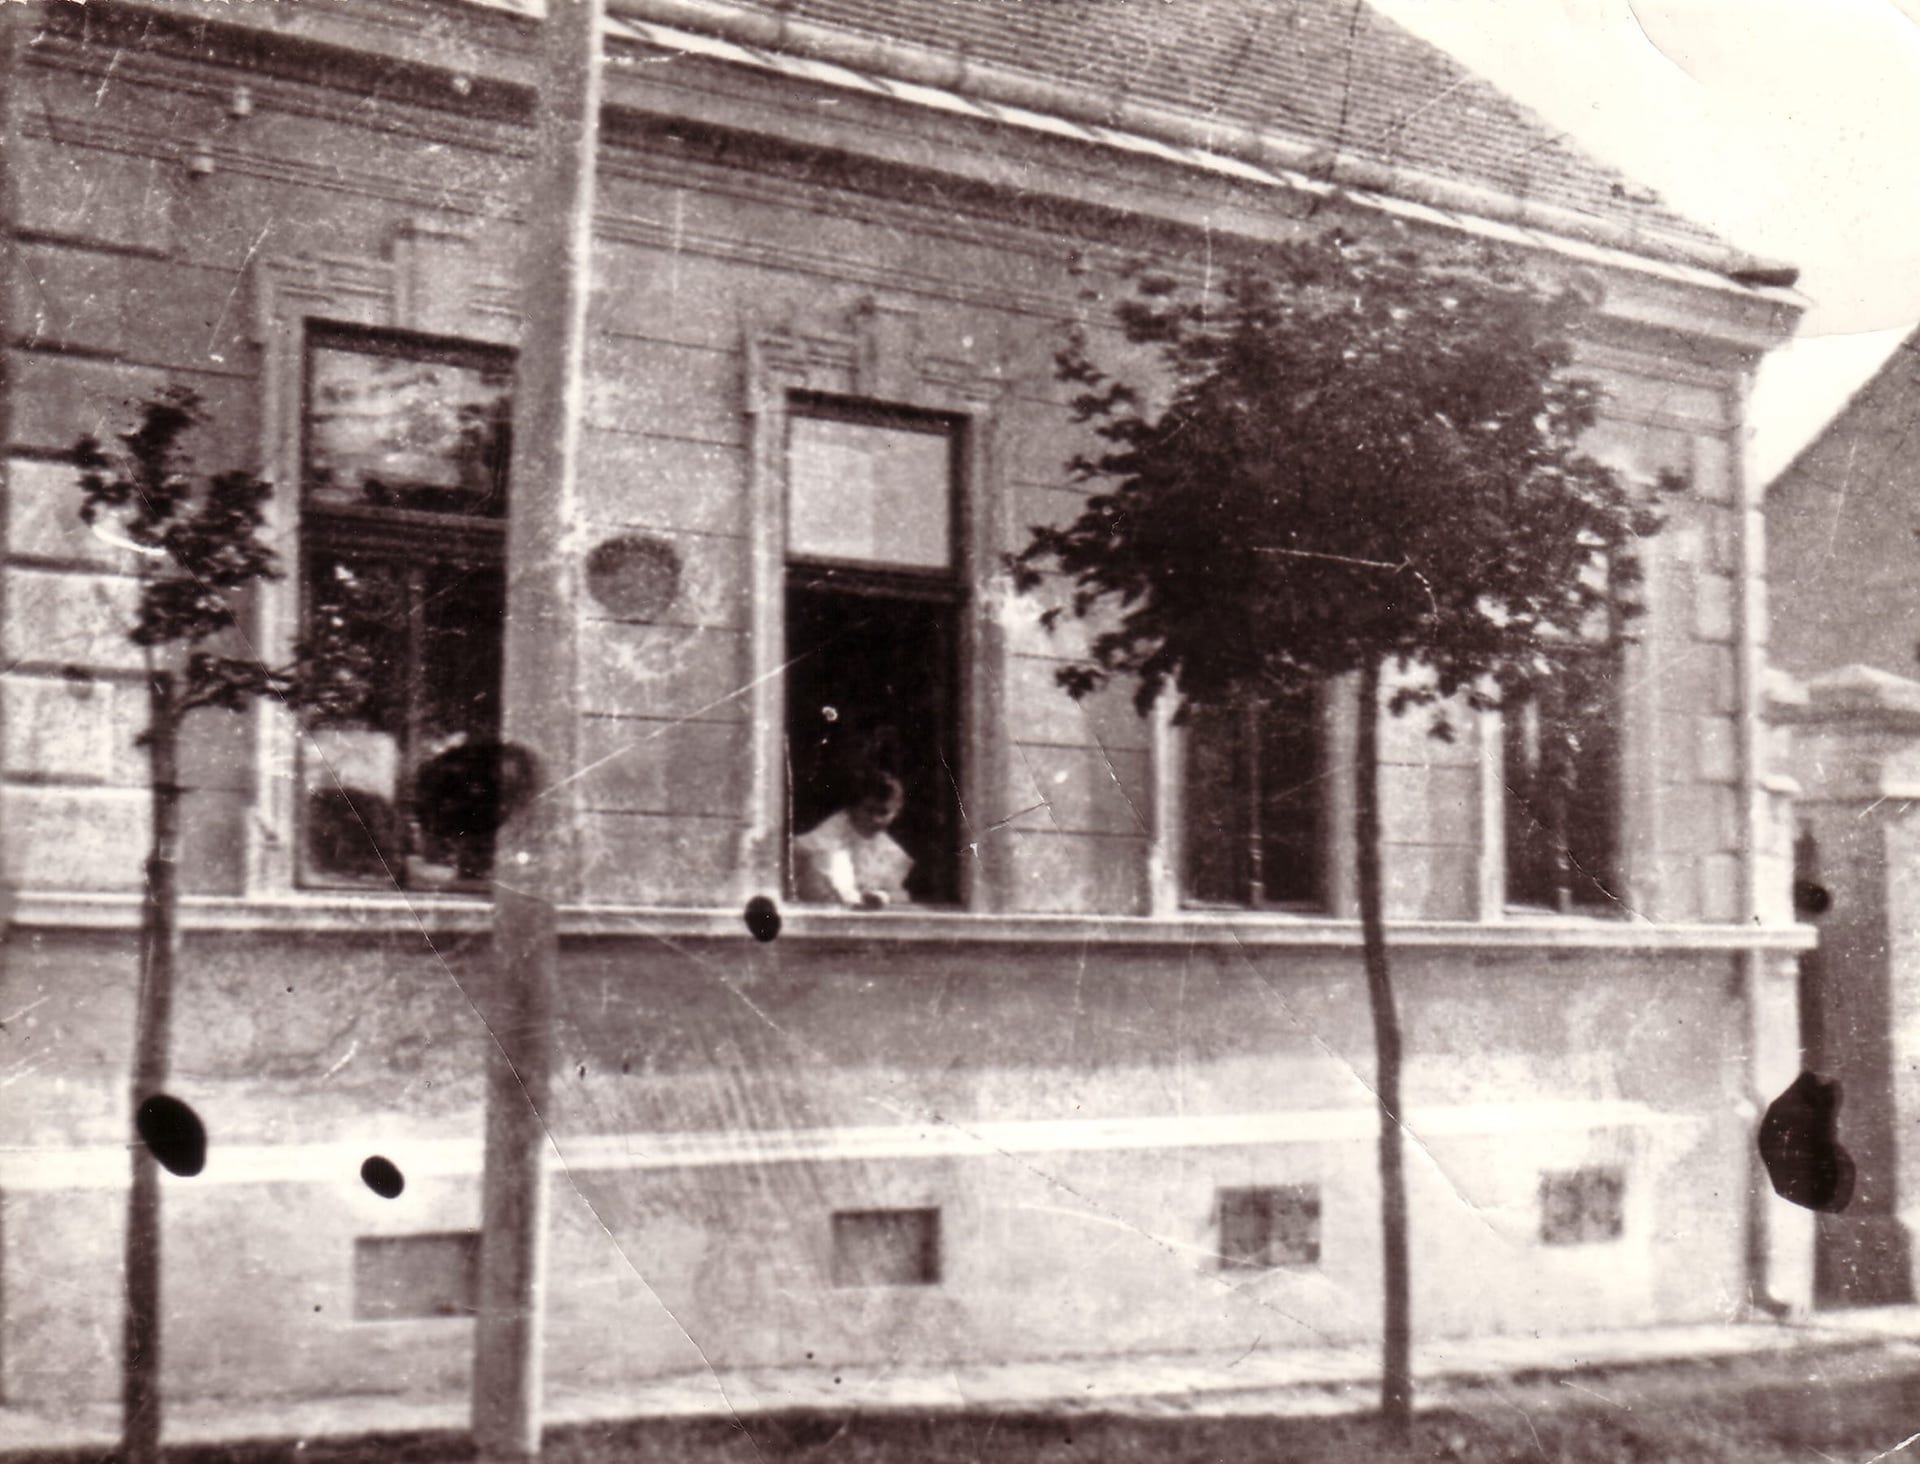 The birthplace of Ferenc Farkas in Nagykanizsa (1905)